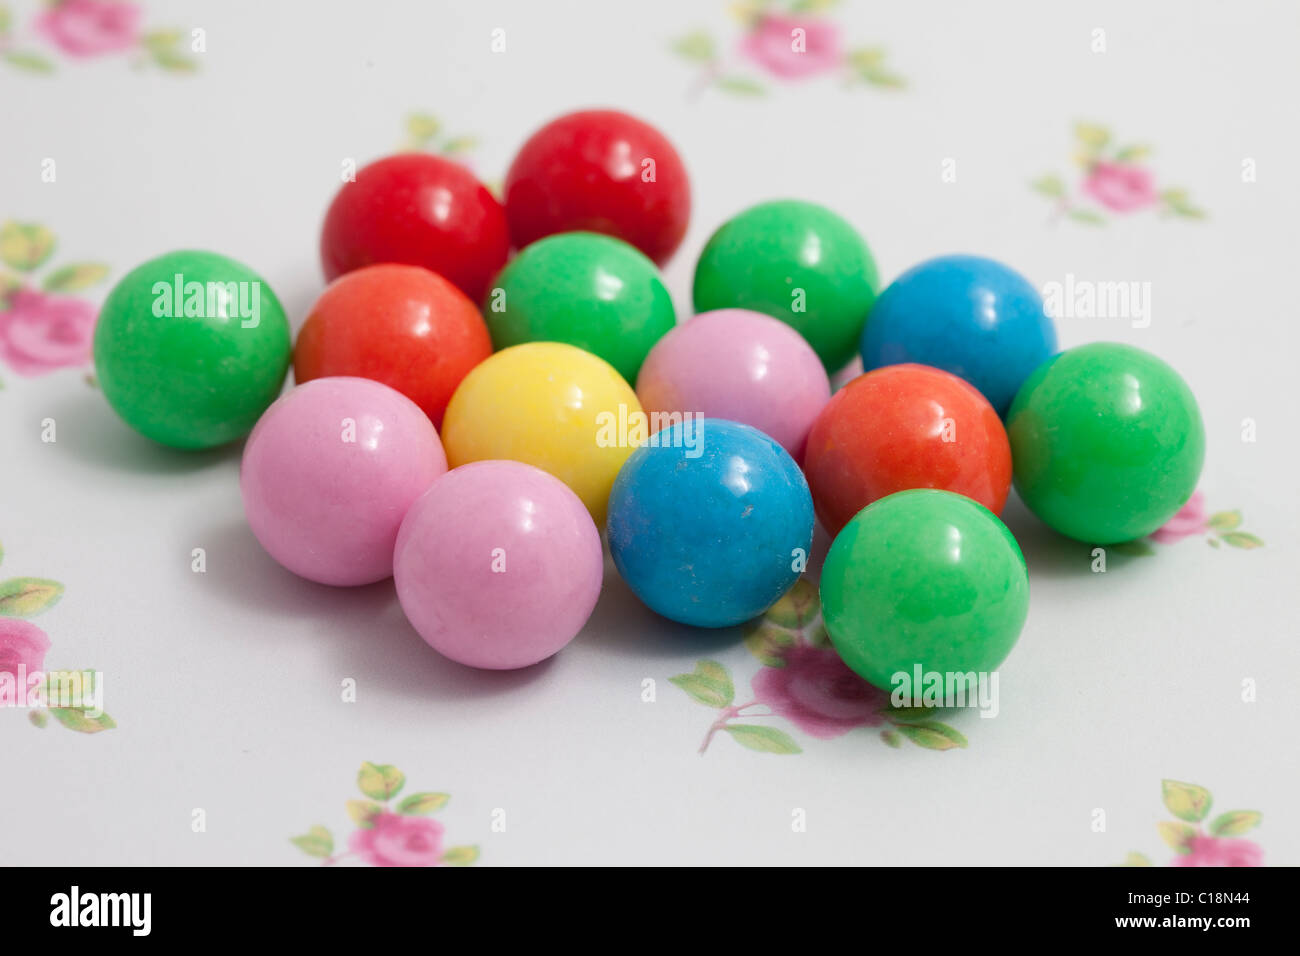 gobstopper balls sweets and candy on a paper background photographed in a studio Stock Photo